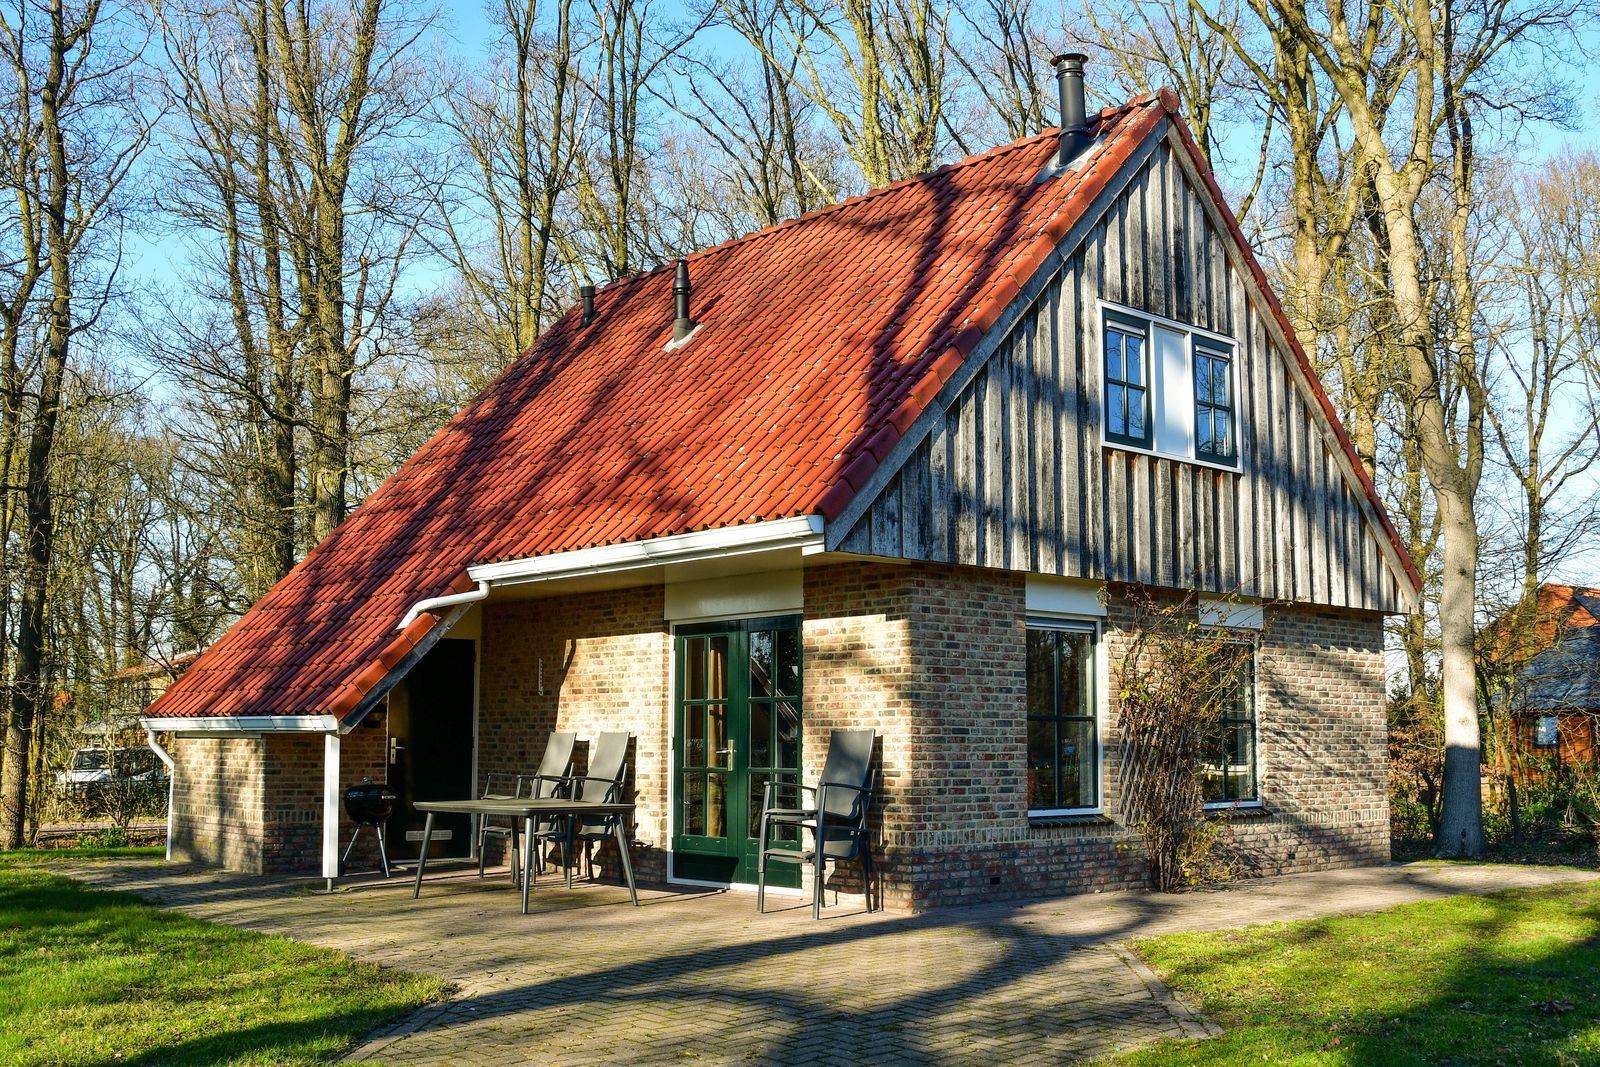 Vechtoever Bungalow (5 people)